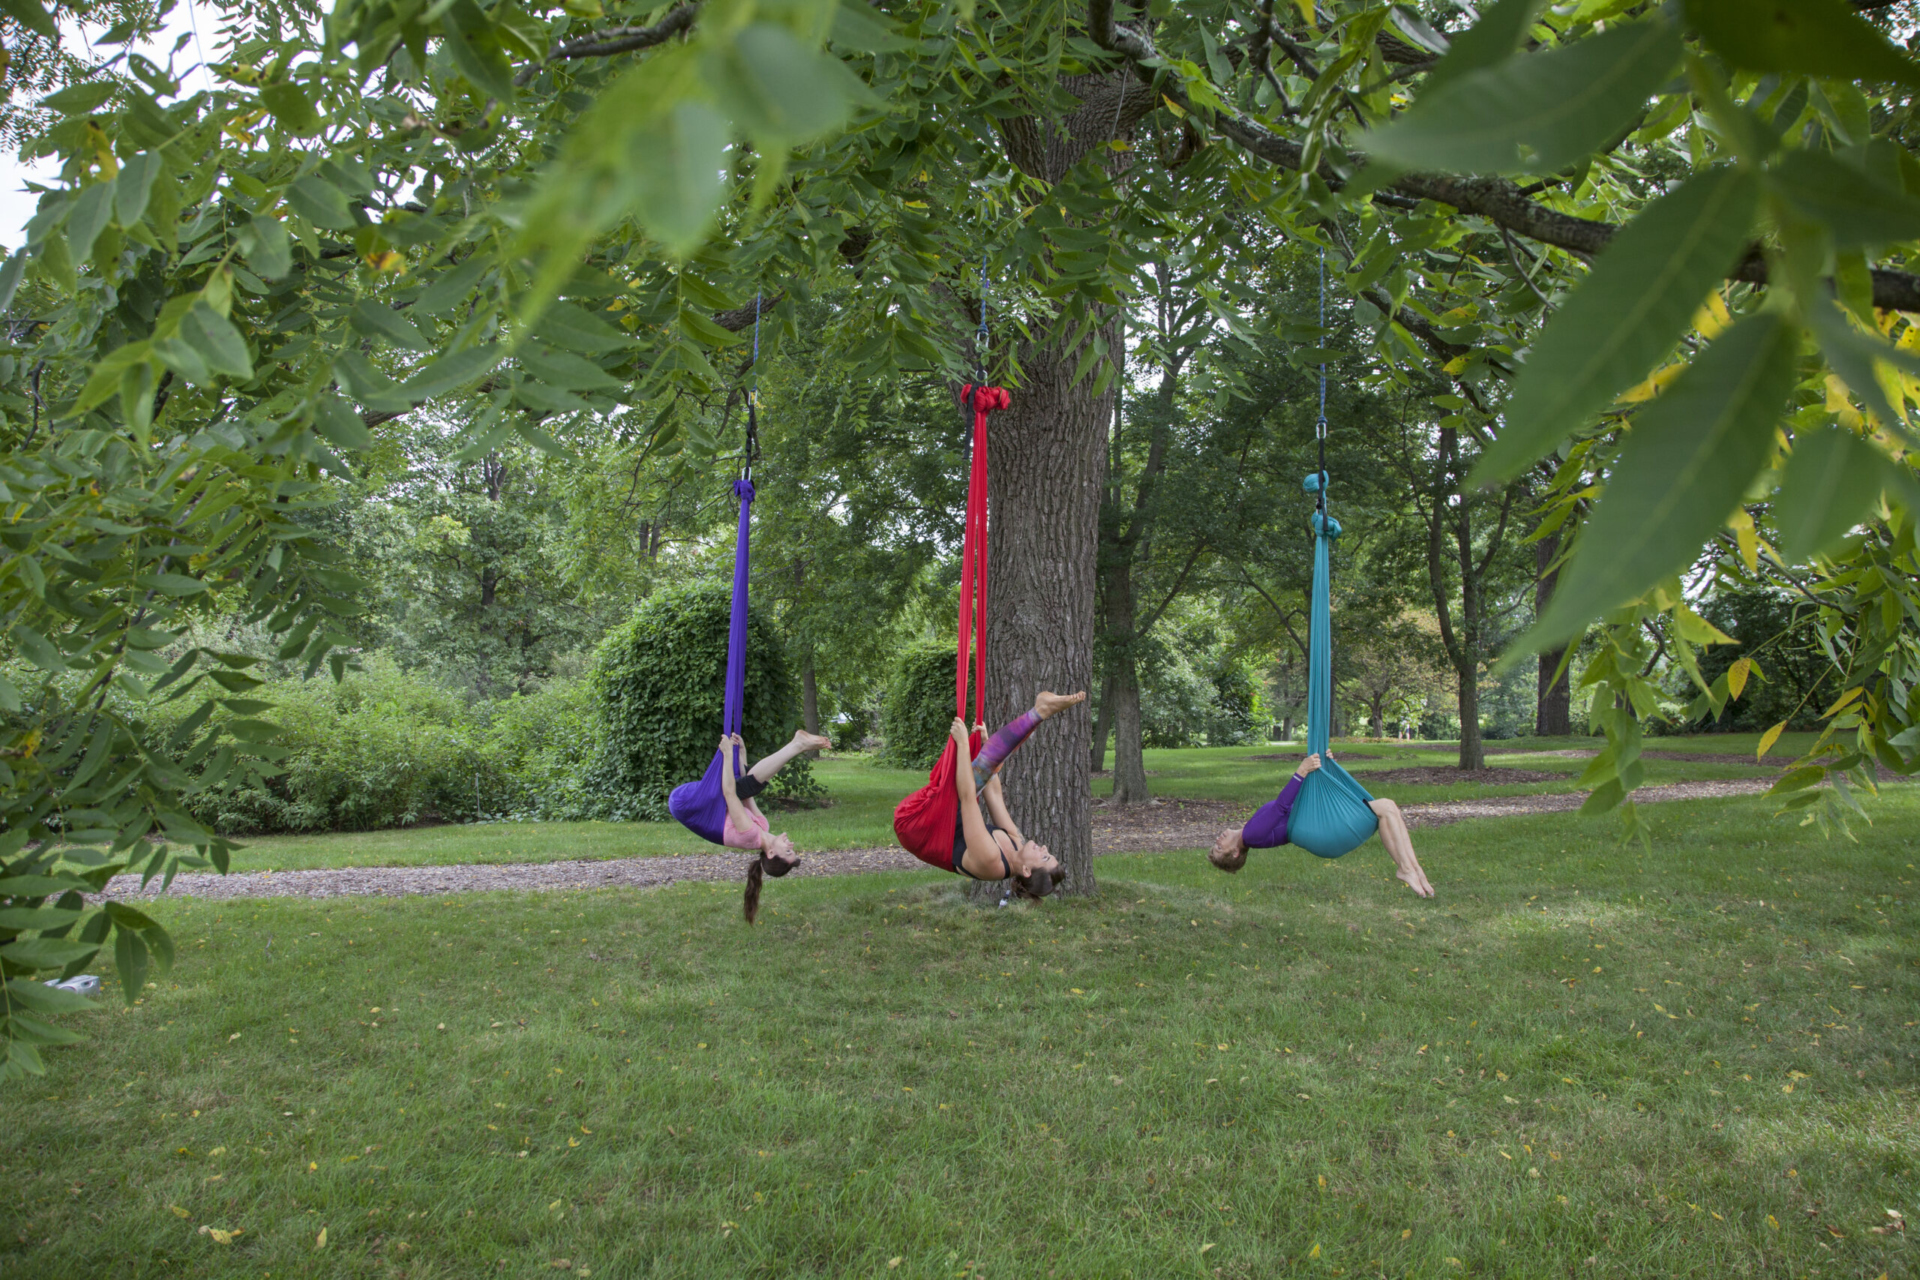 A group doing aerial yoga hanging from a large tree branch.